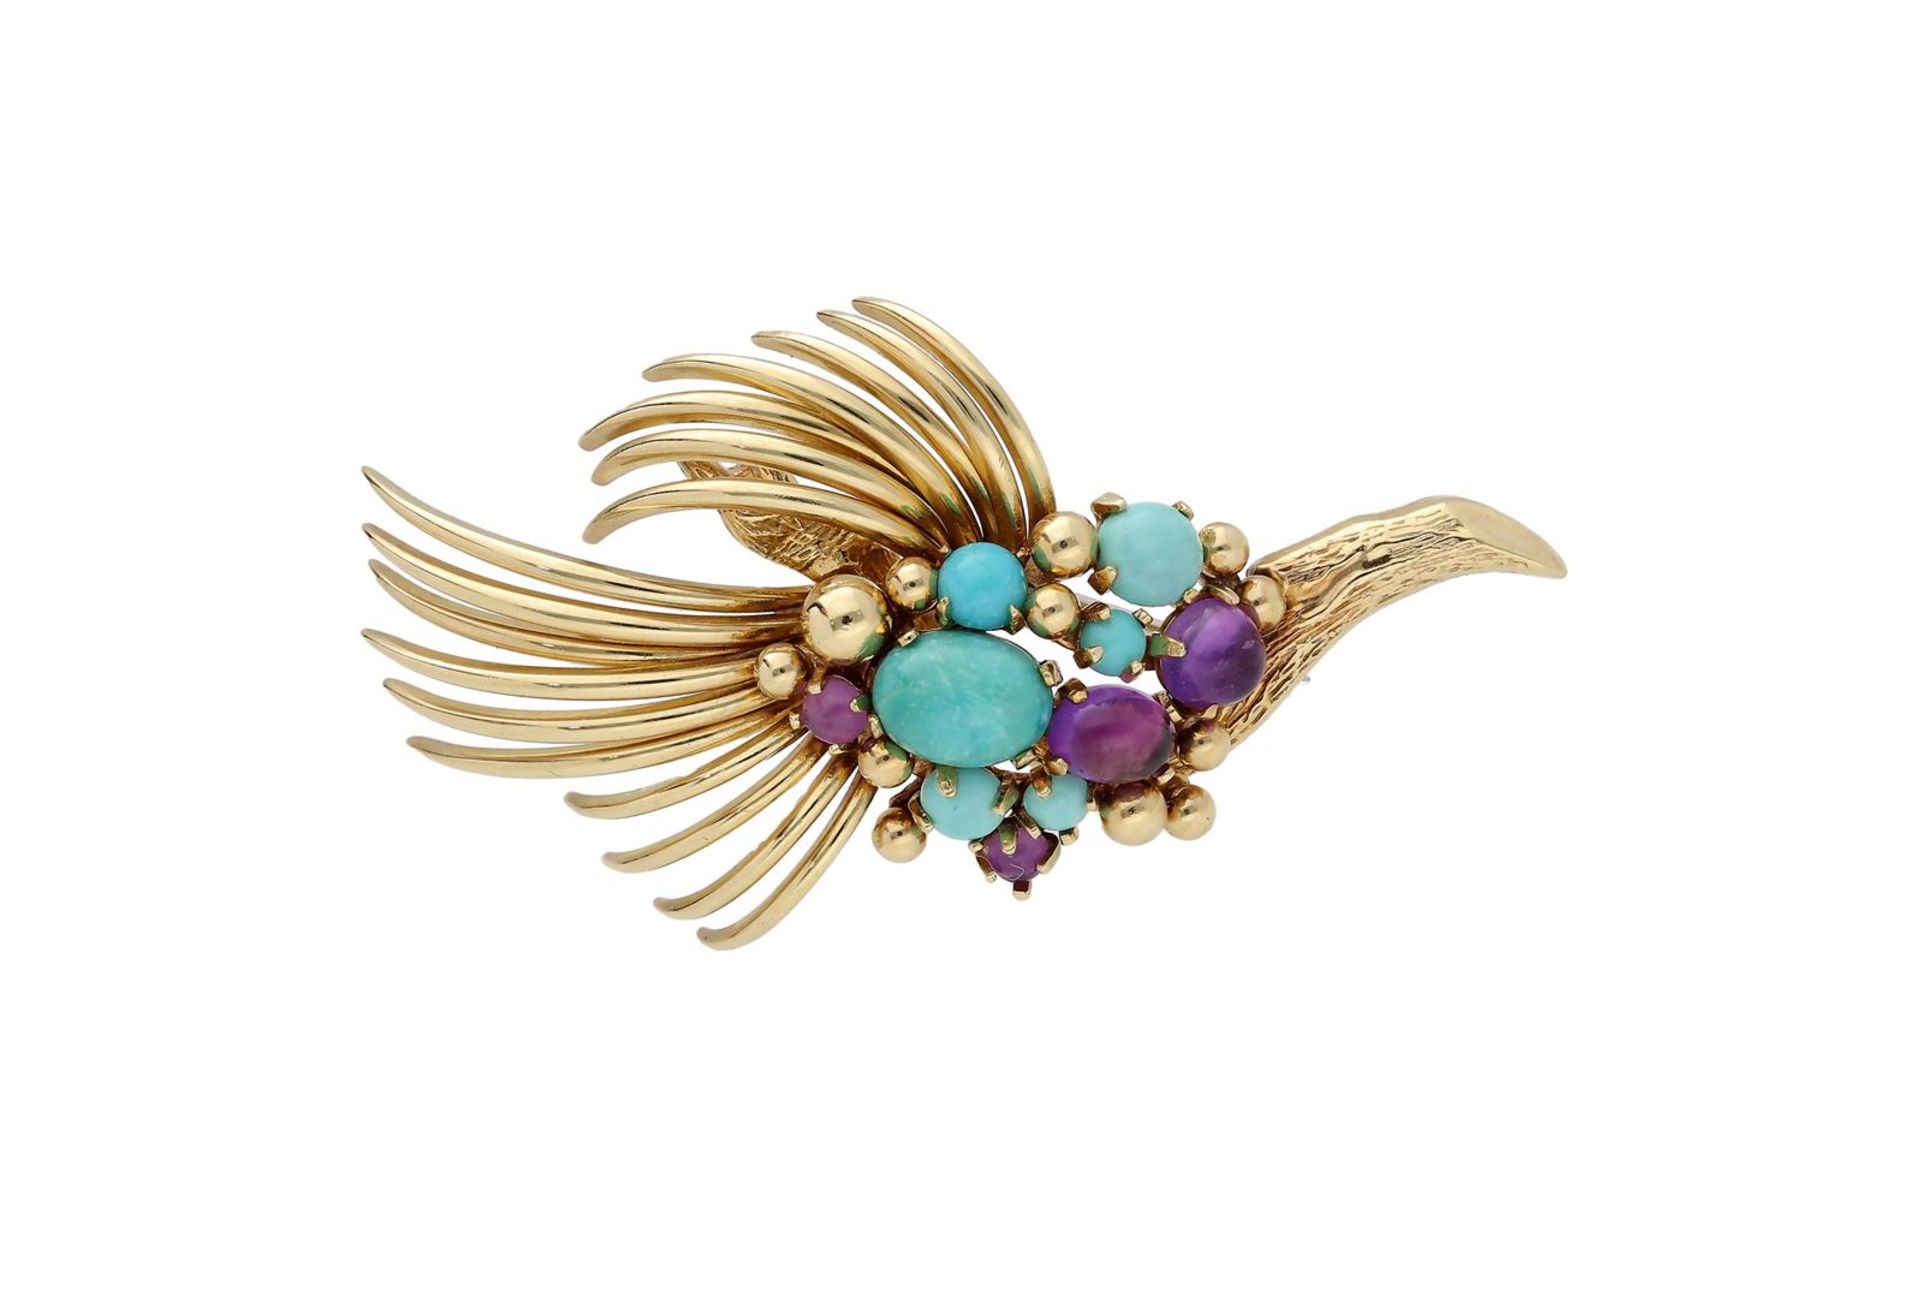 A 14-kt 'bird' brooch, set with treated turquoise and amethyst cabochons.
H x W: 3.5 x 6.5 cm. Total